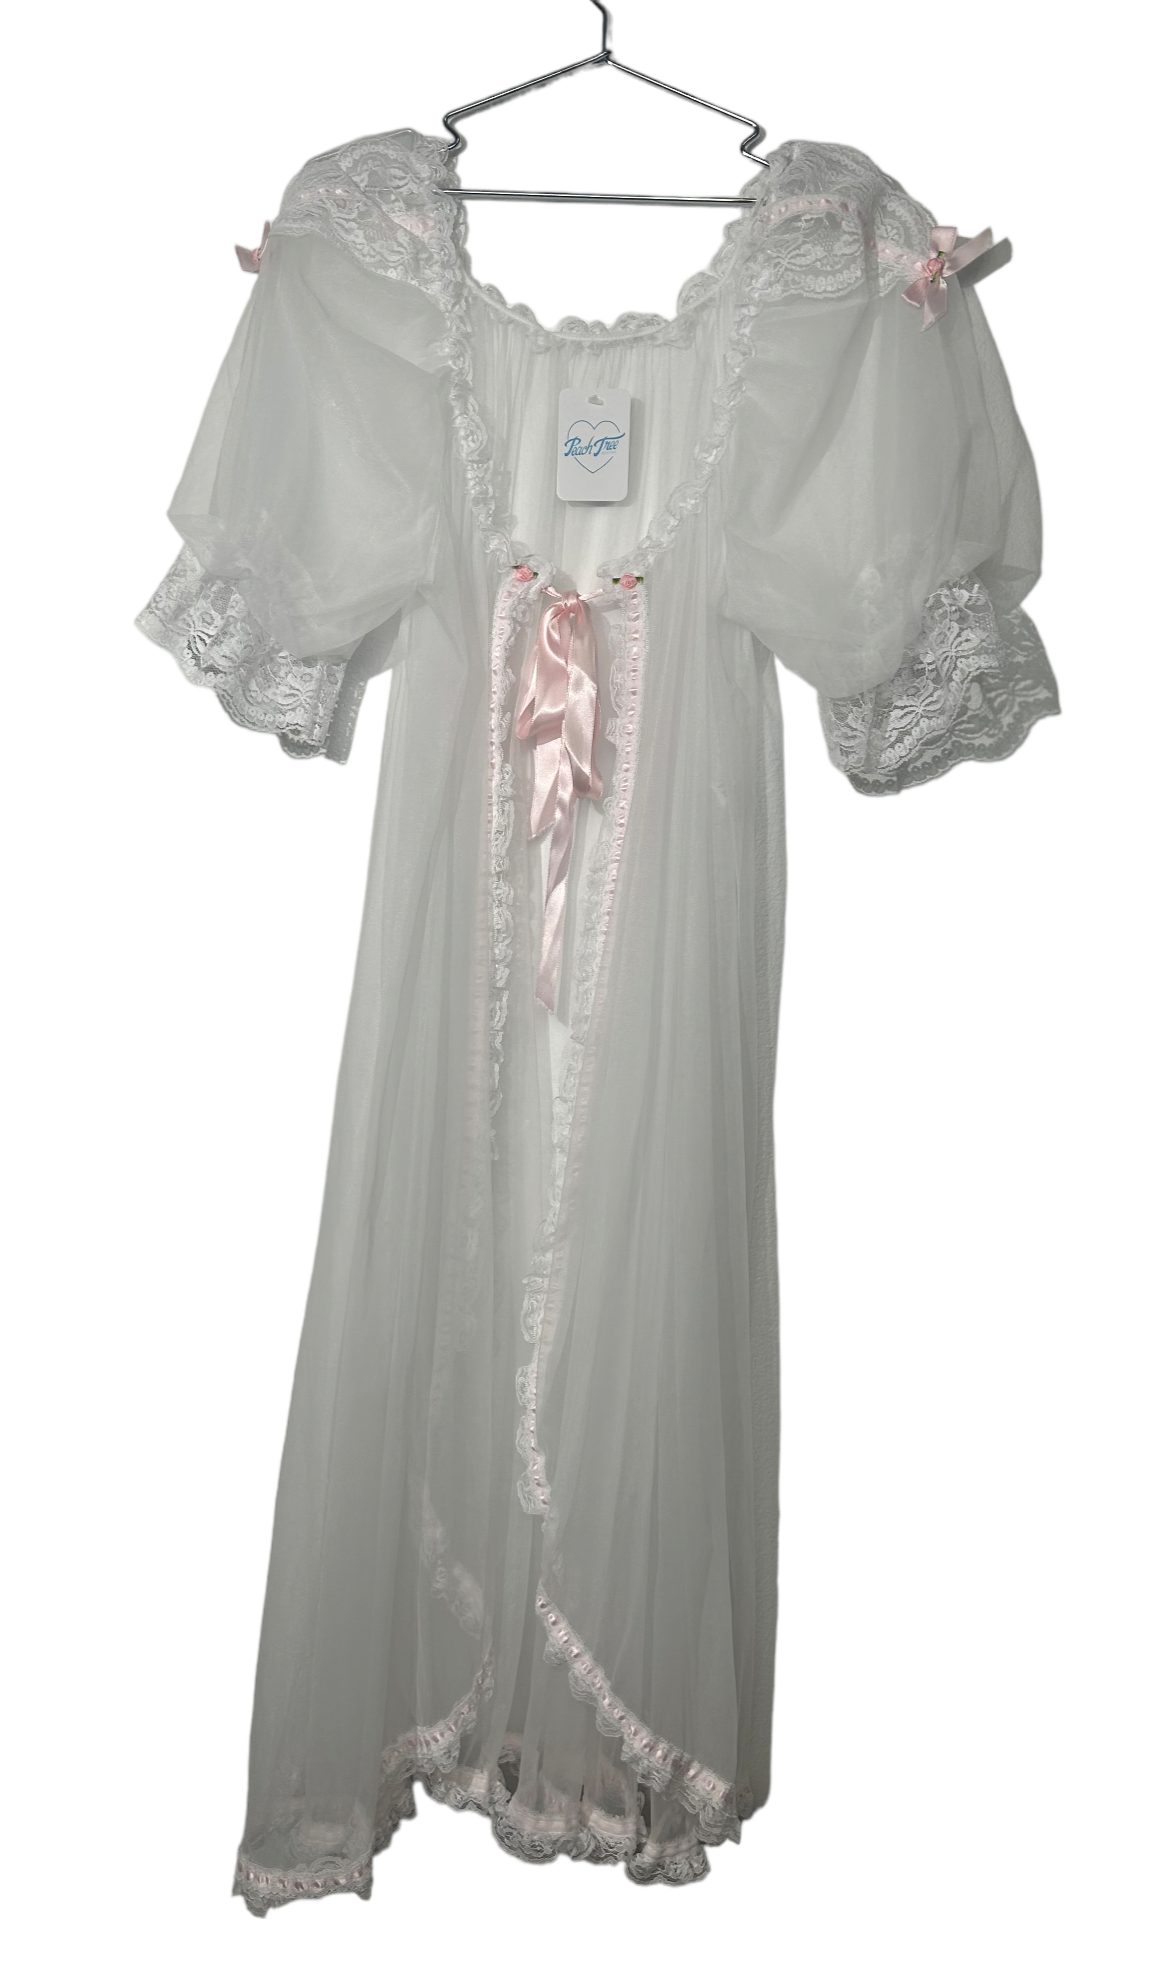 Tosca White Lace Floral Baby Doll Robe